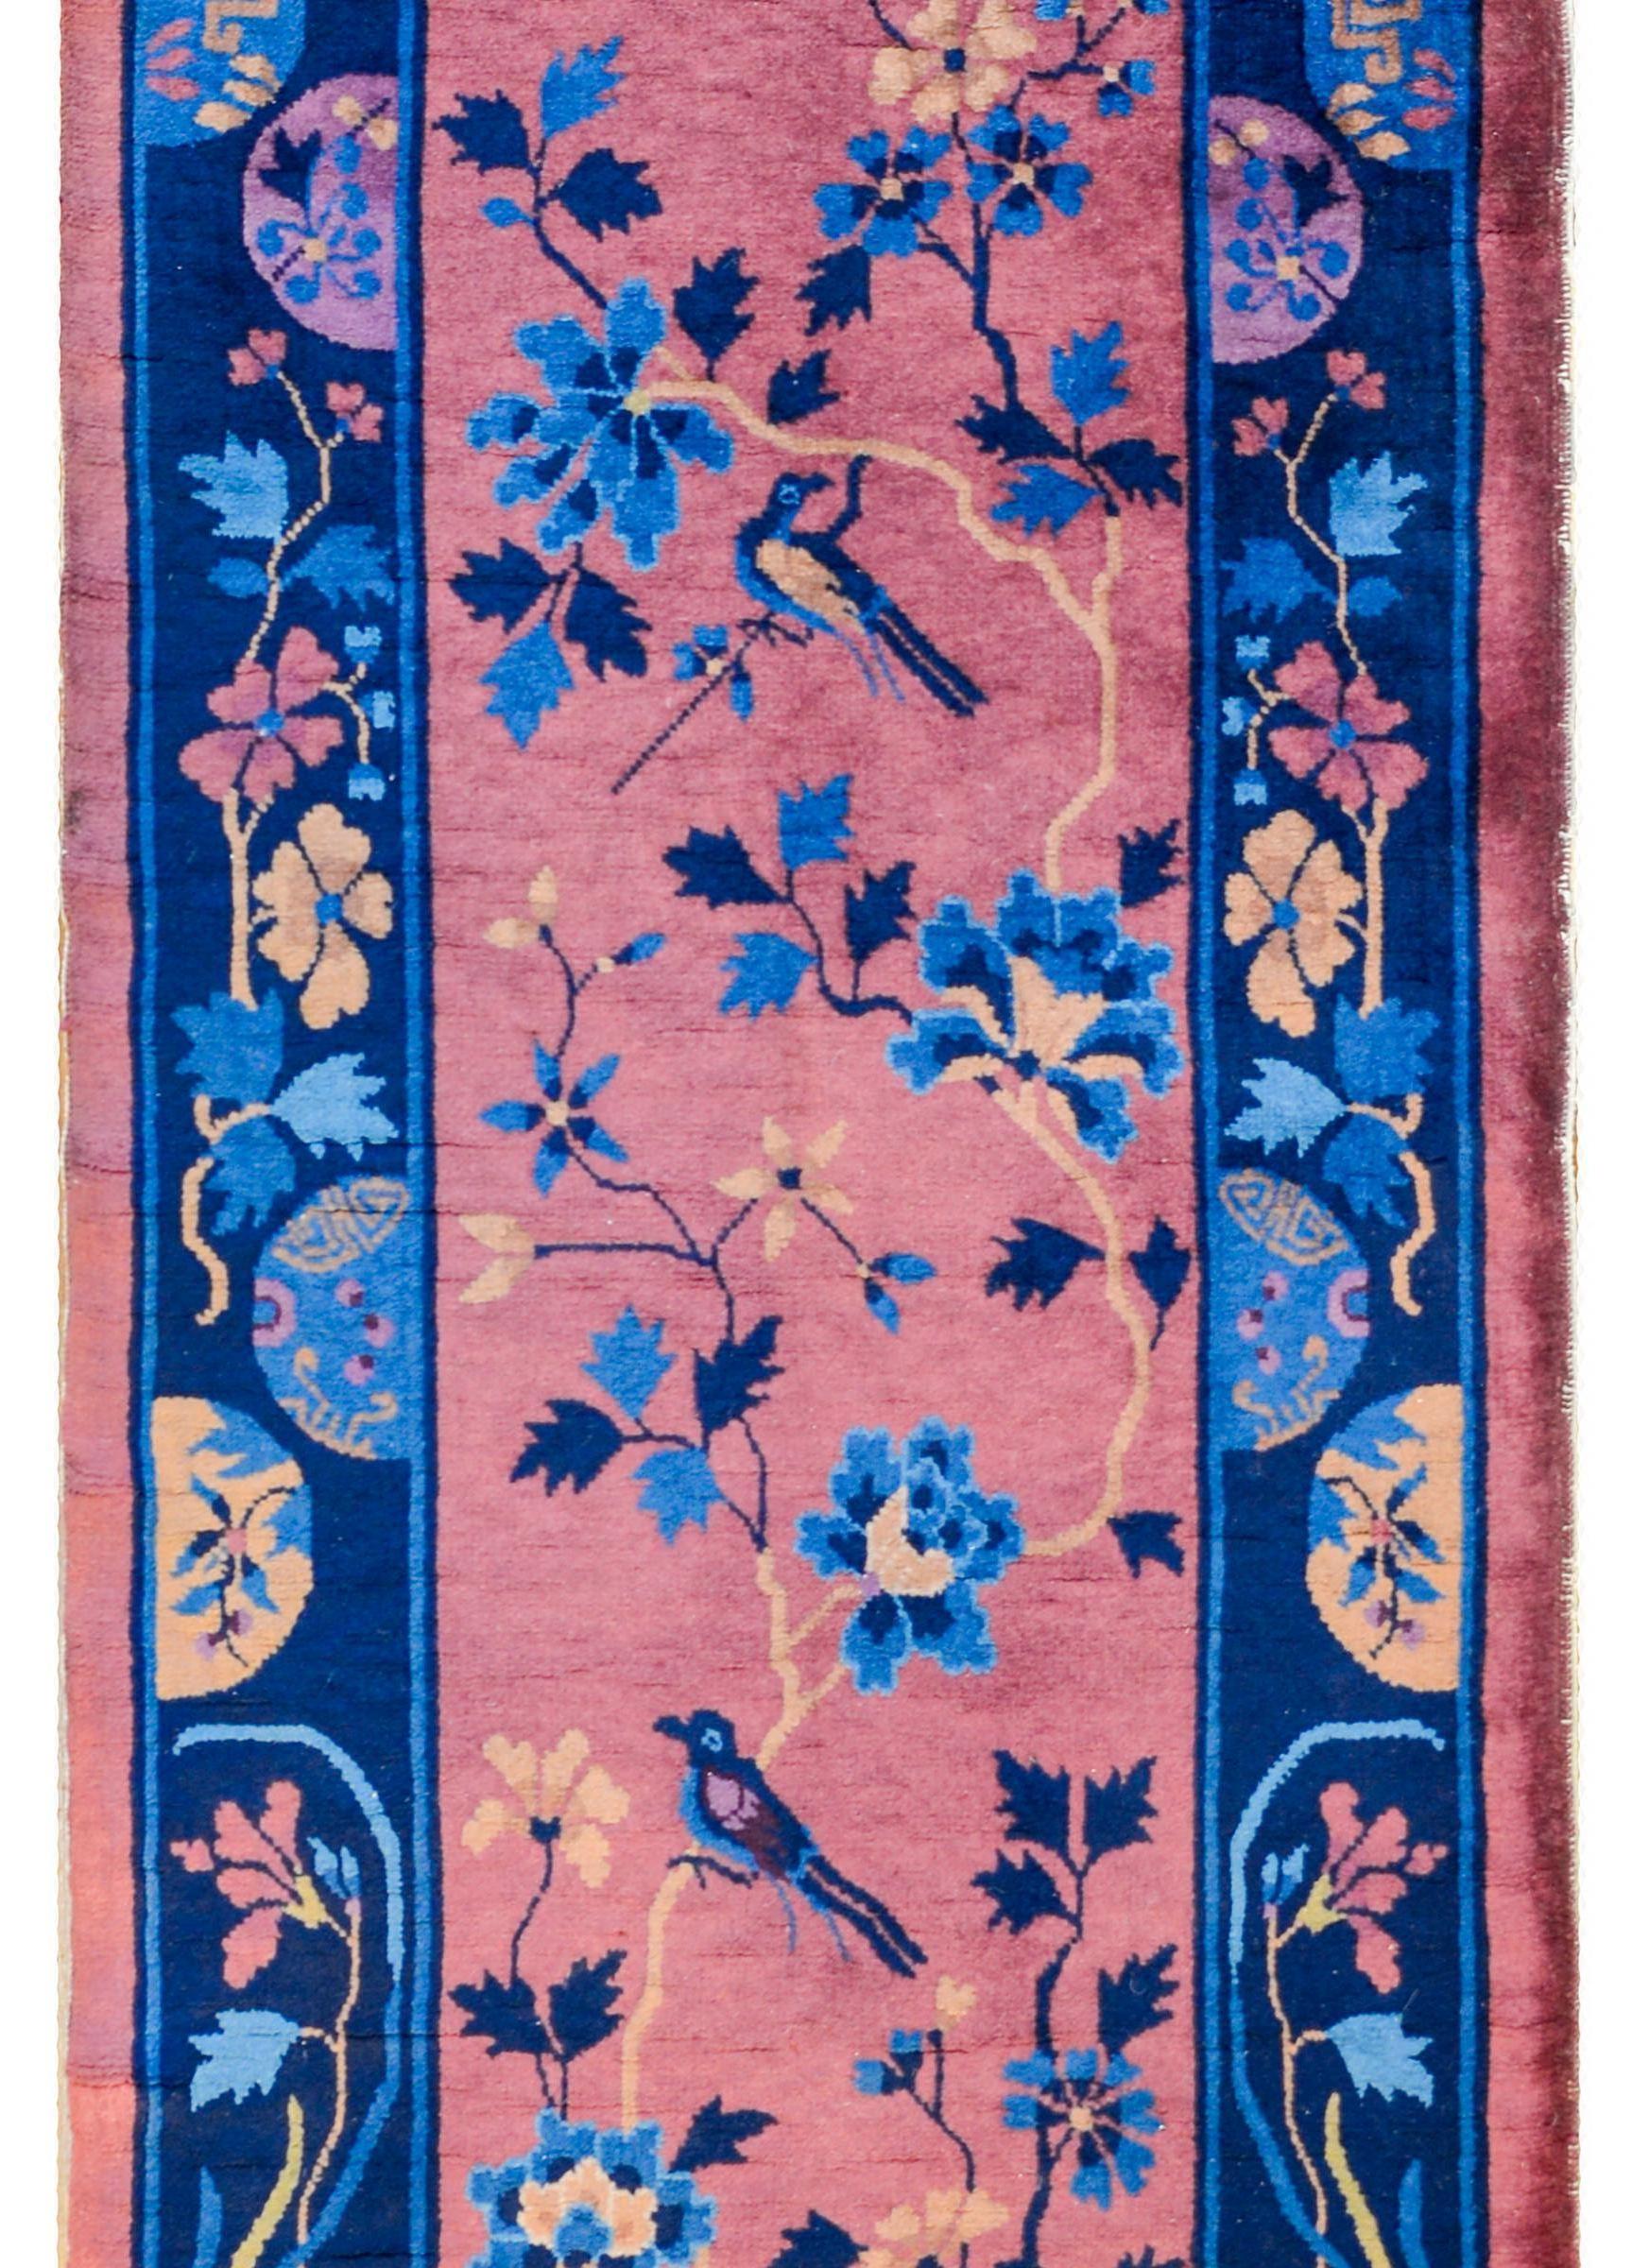 An early 20th century Chinese Art Deco runner with a mauve colored field with a beautiful pattern of flowering peonies and prunus blossoms on scrolling branches with magpies, all rendered in light and dark indigo with beige and violet. The border is